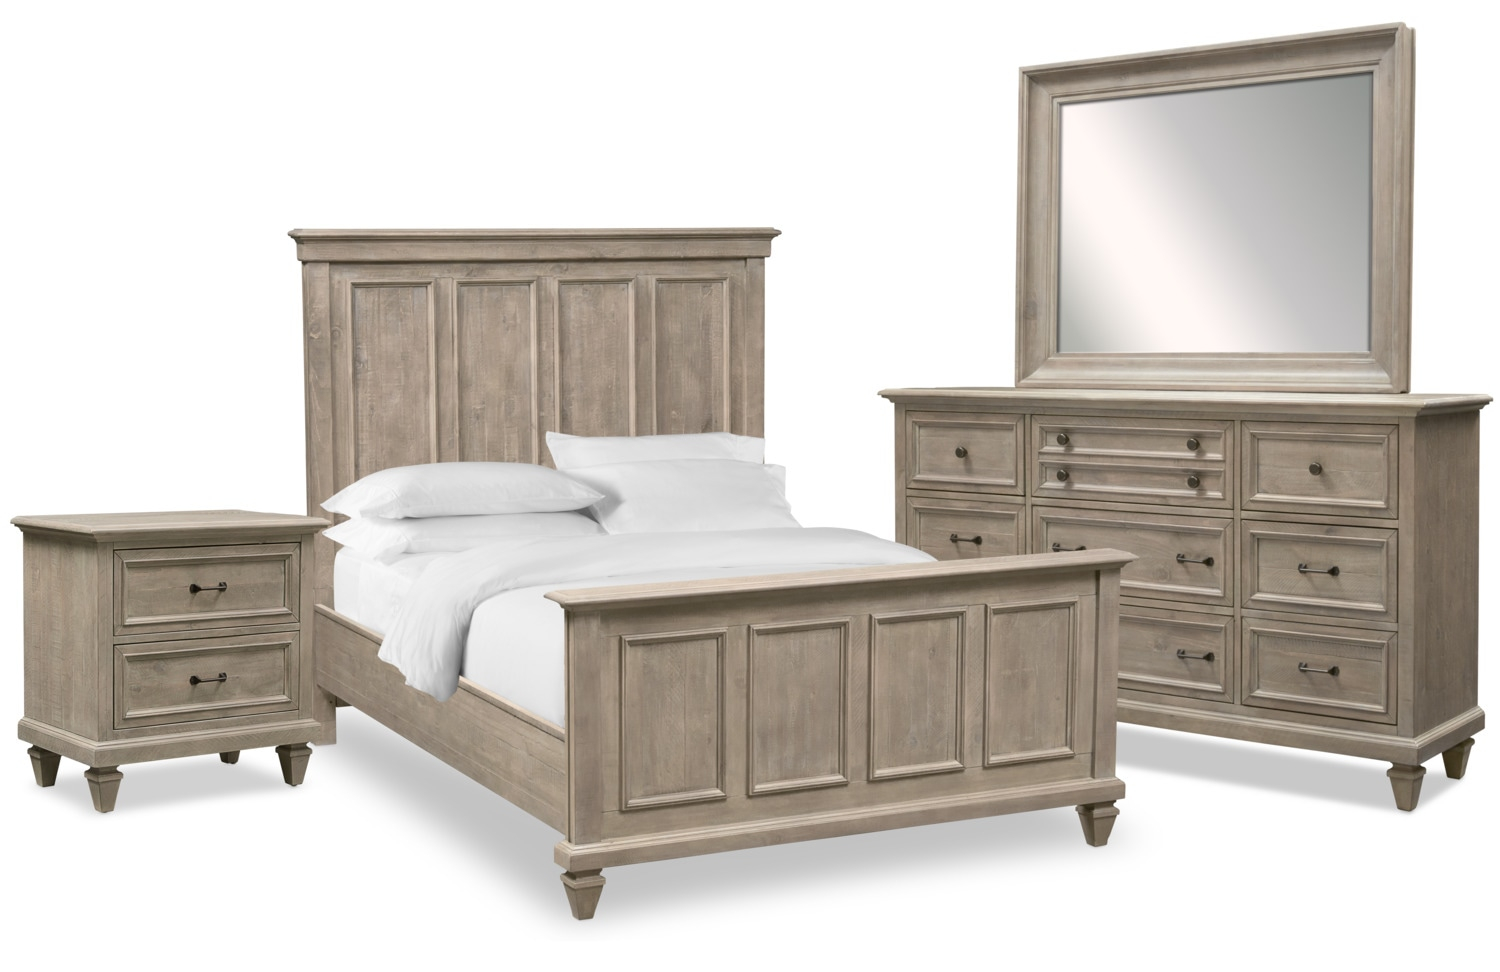 Harrison 6 Piece Bedroom Set With Nightstand Dresser And Mirror with regard to dimensions 1500 X 972